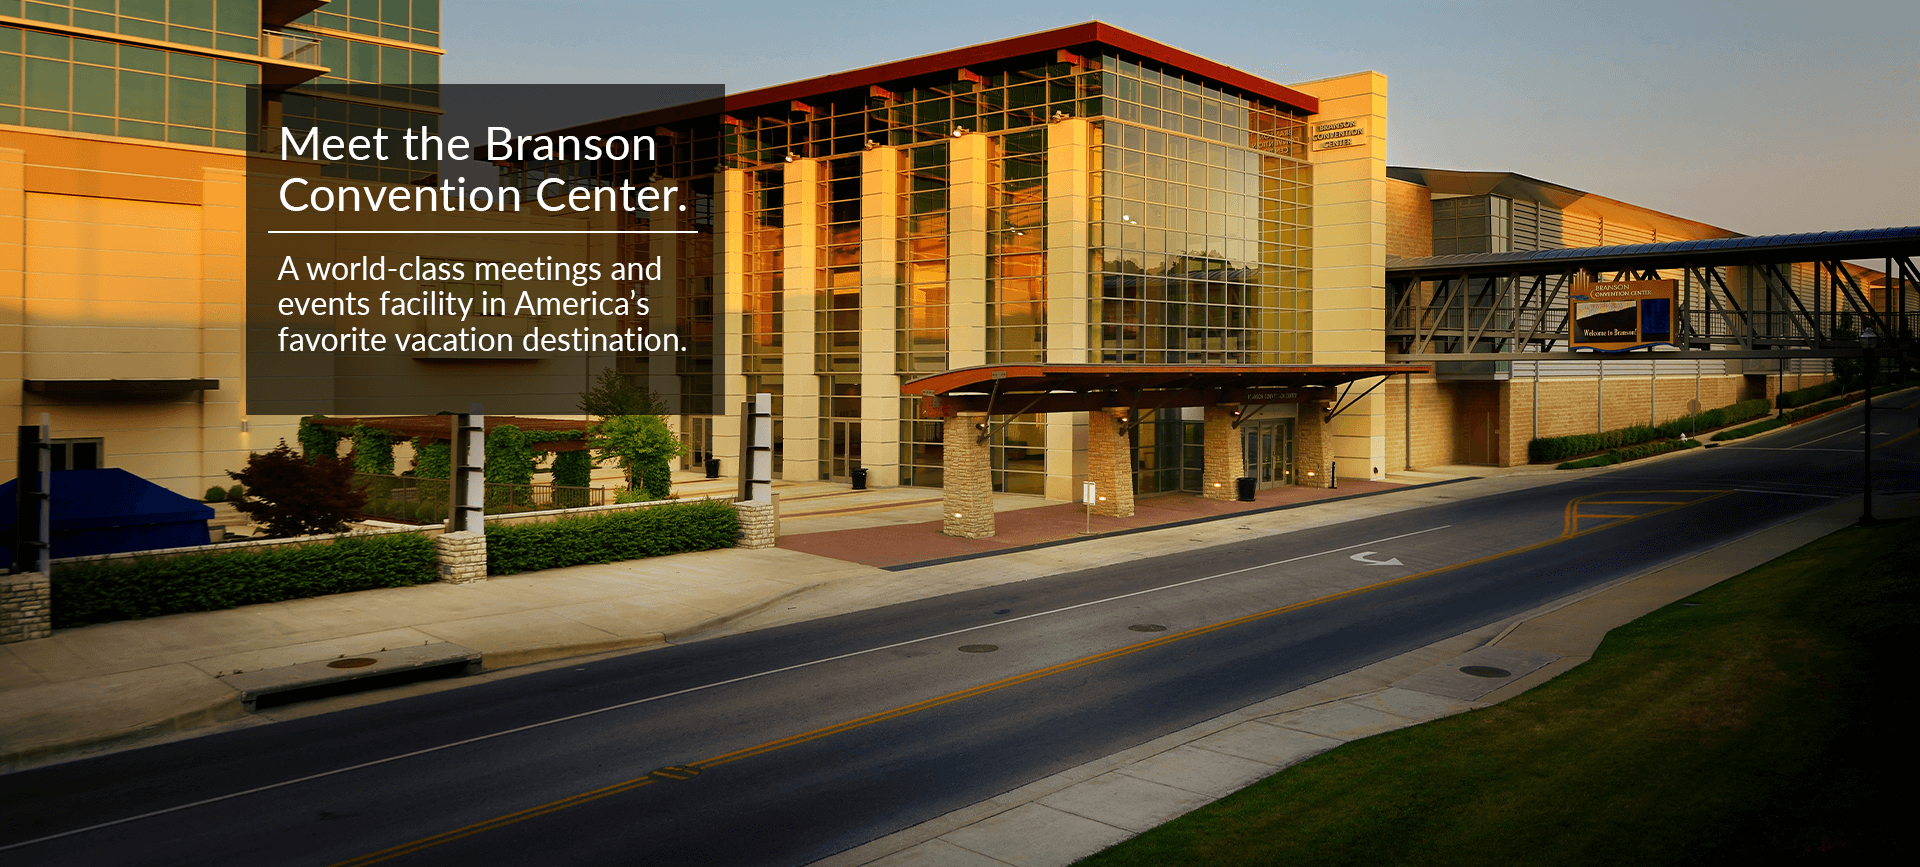 Branson Convention Center is a world-class meetings and events facility in America’s favorite vacation destination.